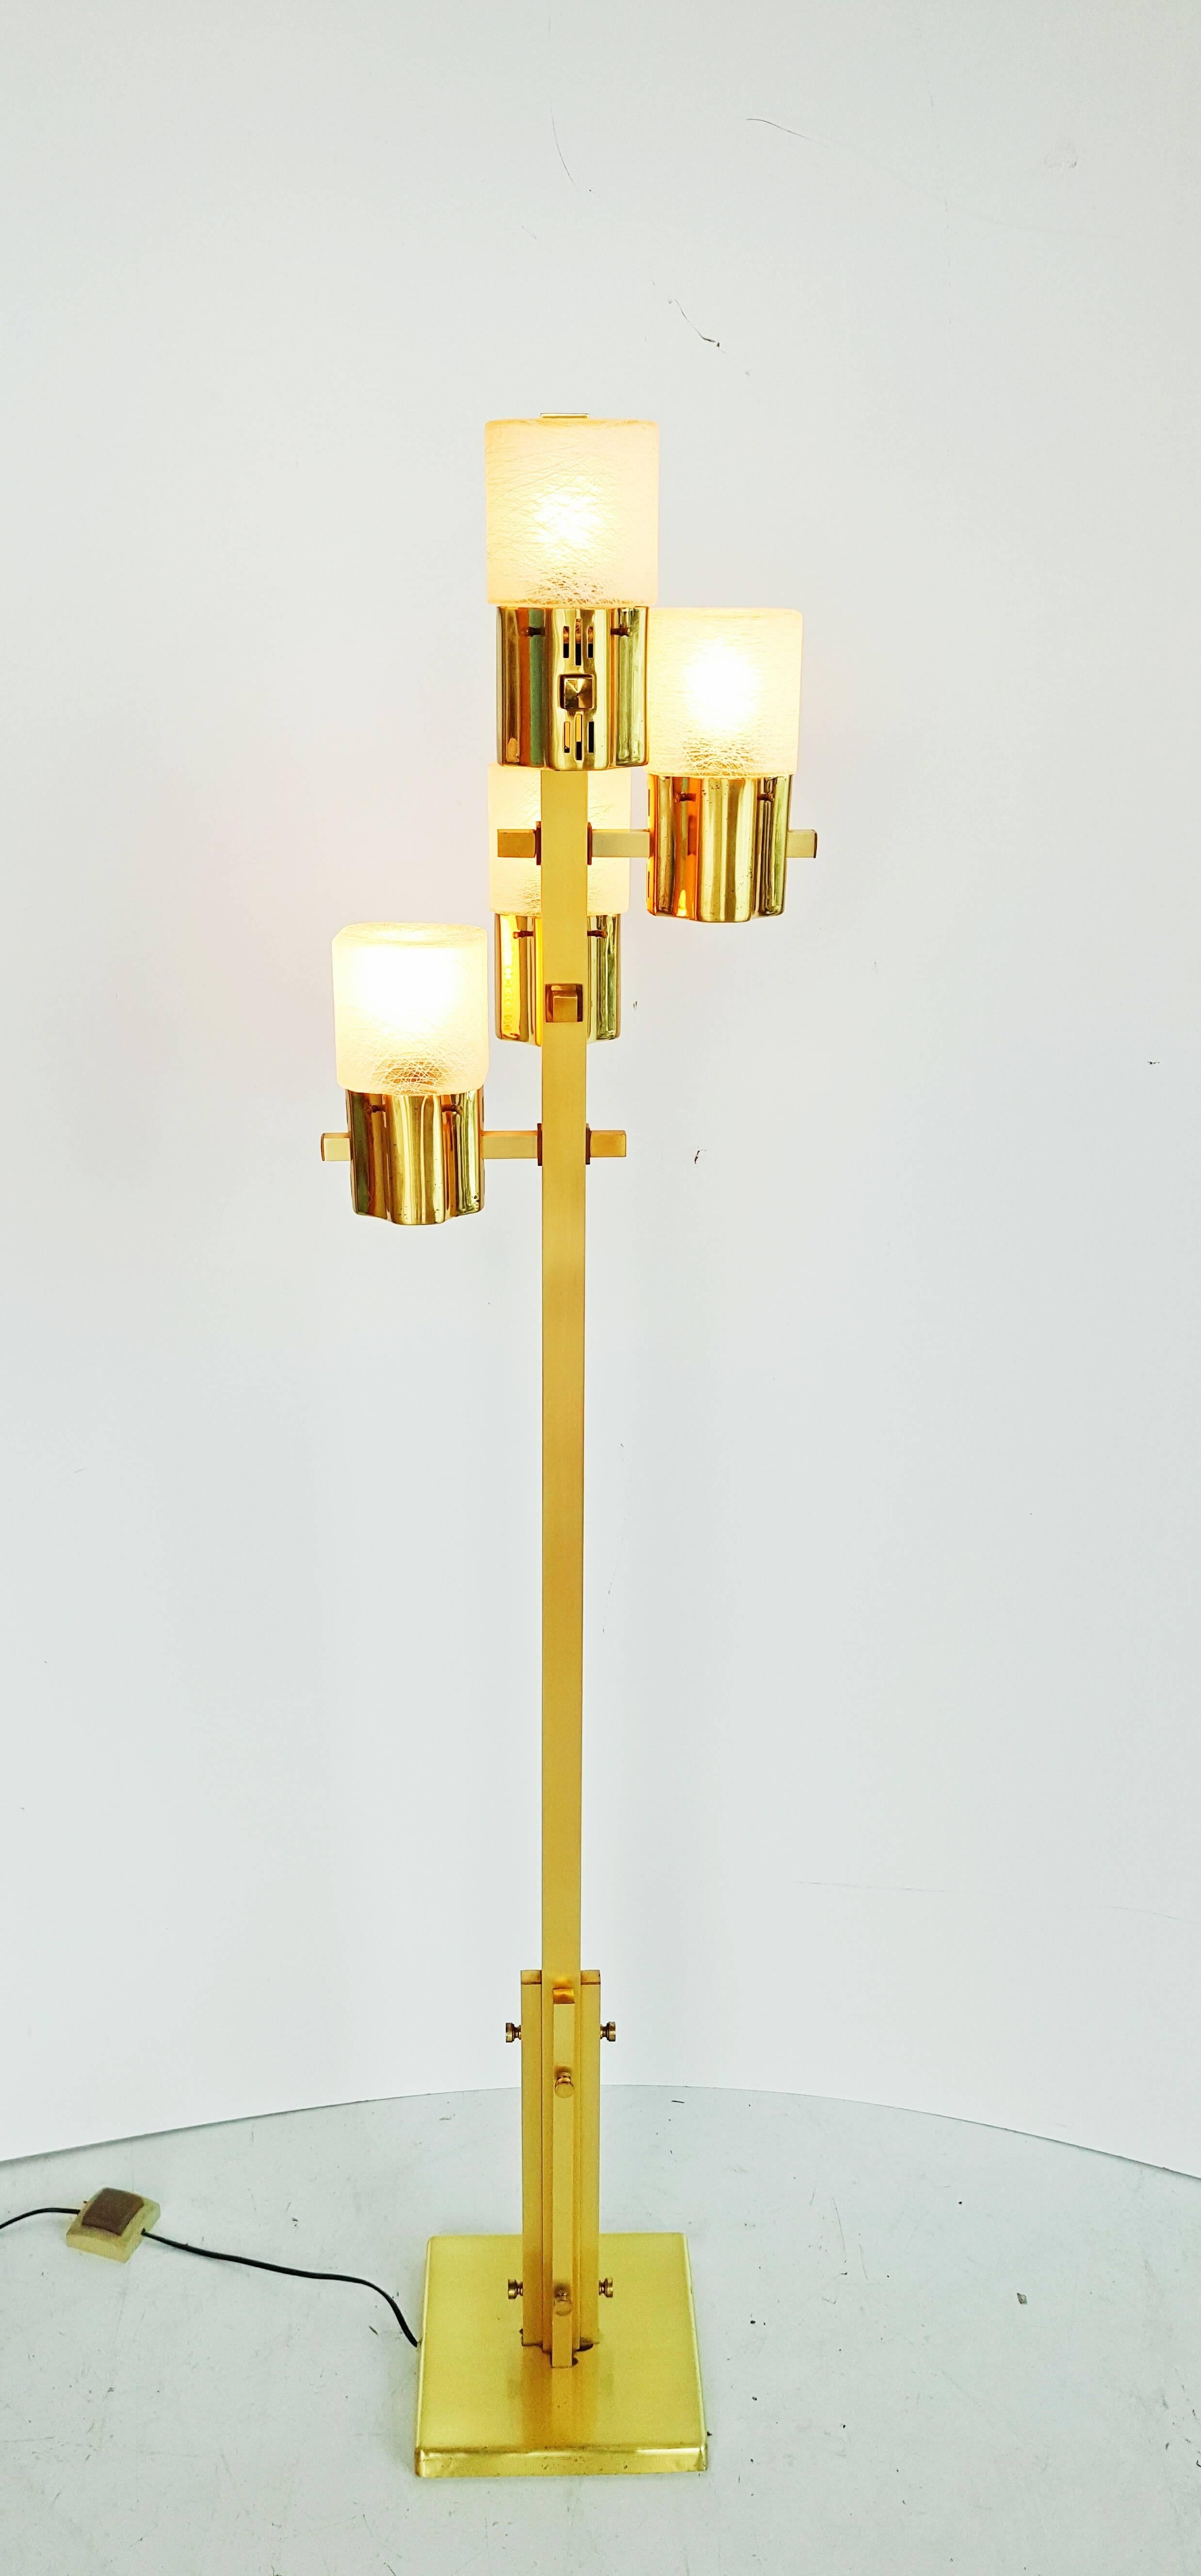 Rare Gaetano Sciolari floor lamp manufactured in Italy in 1970s. Brass and Murano glass in very good vintage condition.